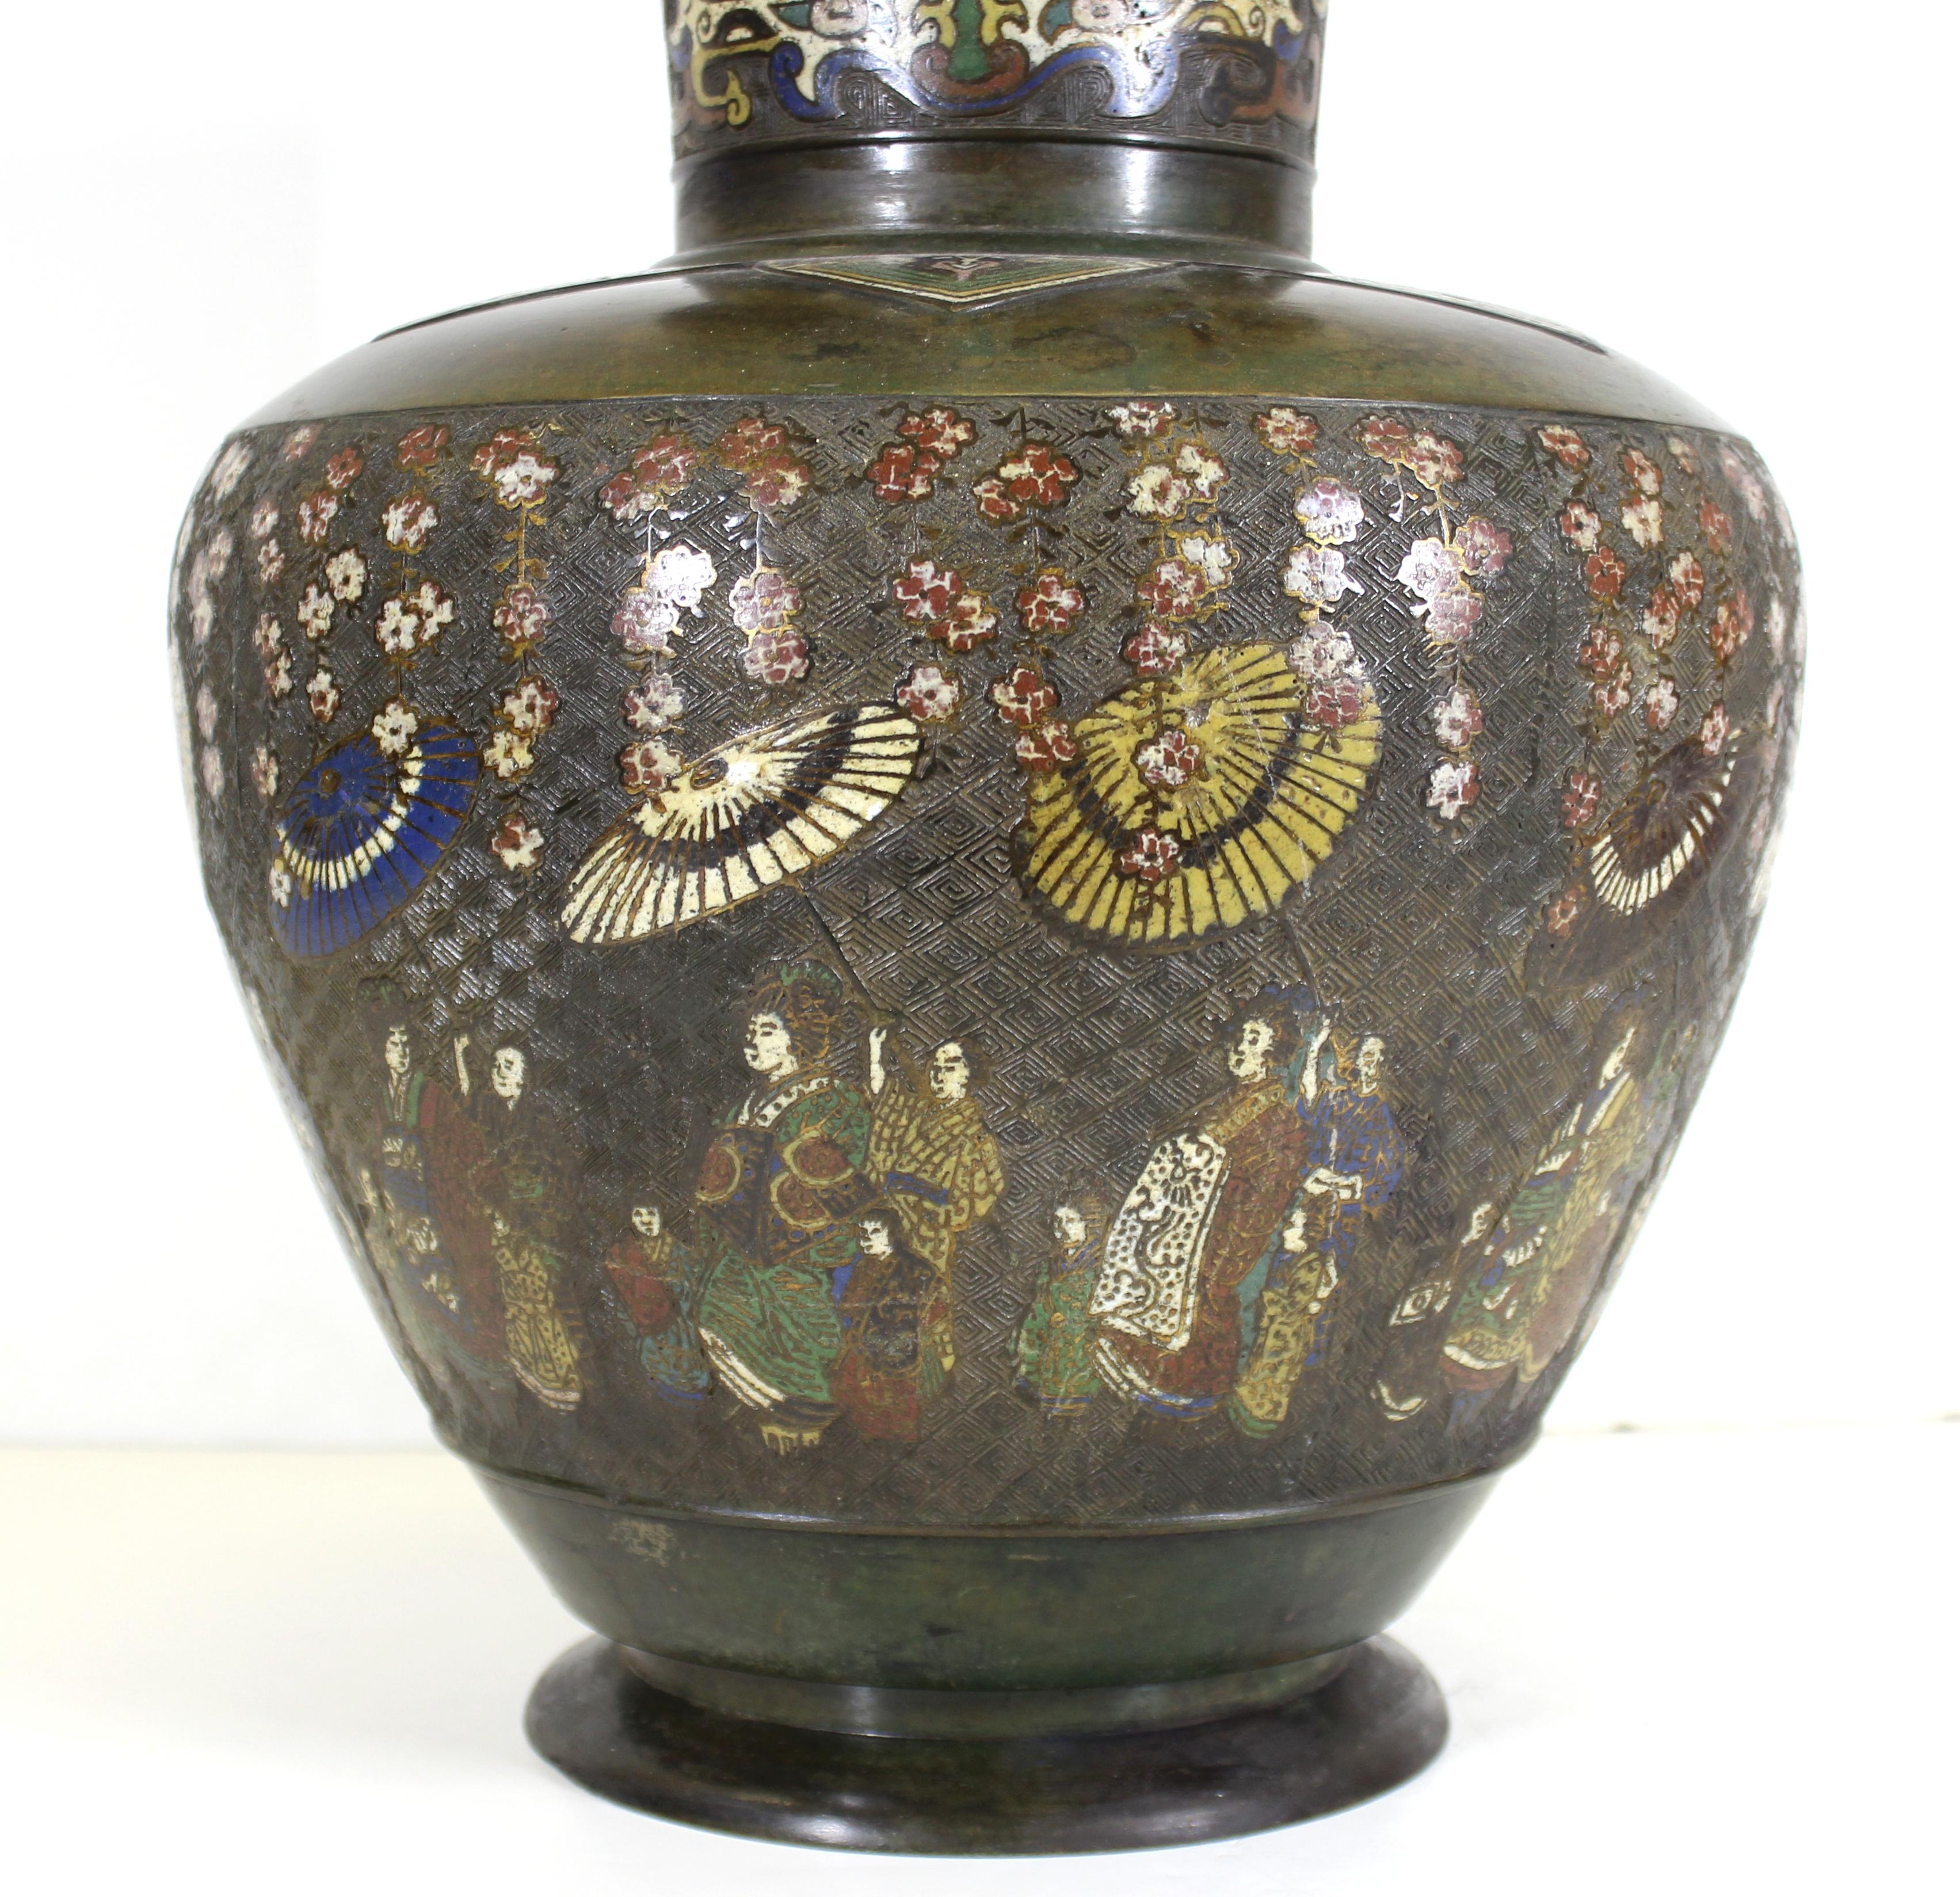 Japanese Meiji period archaic Chinese revival bronze vase with champlevé enamel scenes with geishas walking with parasols in a garden. The piece was made in the 1900s in Japan. The inside bottom features a relief with a crane in a garden. In great